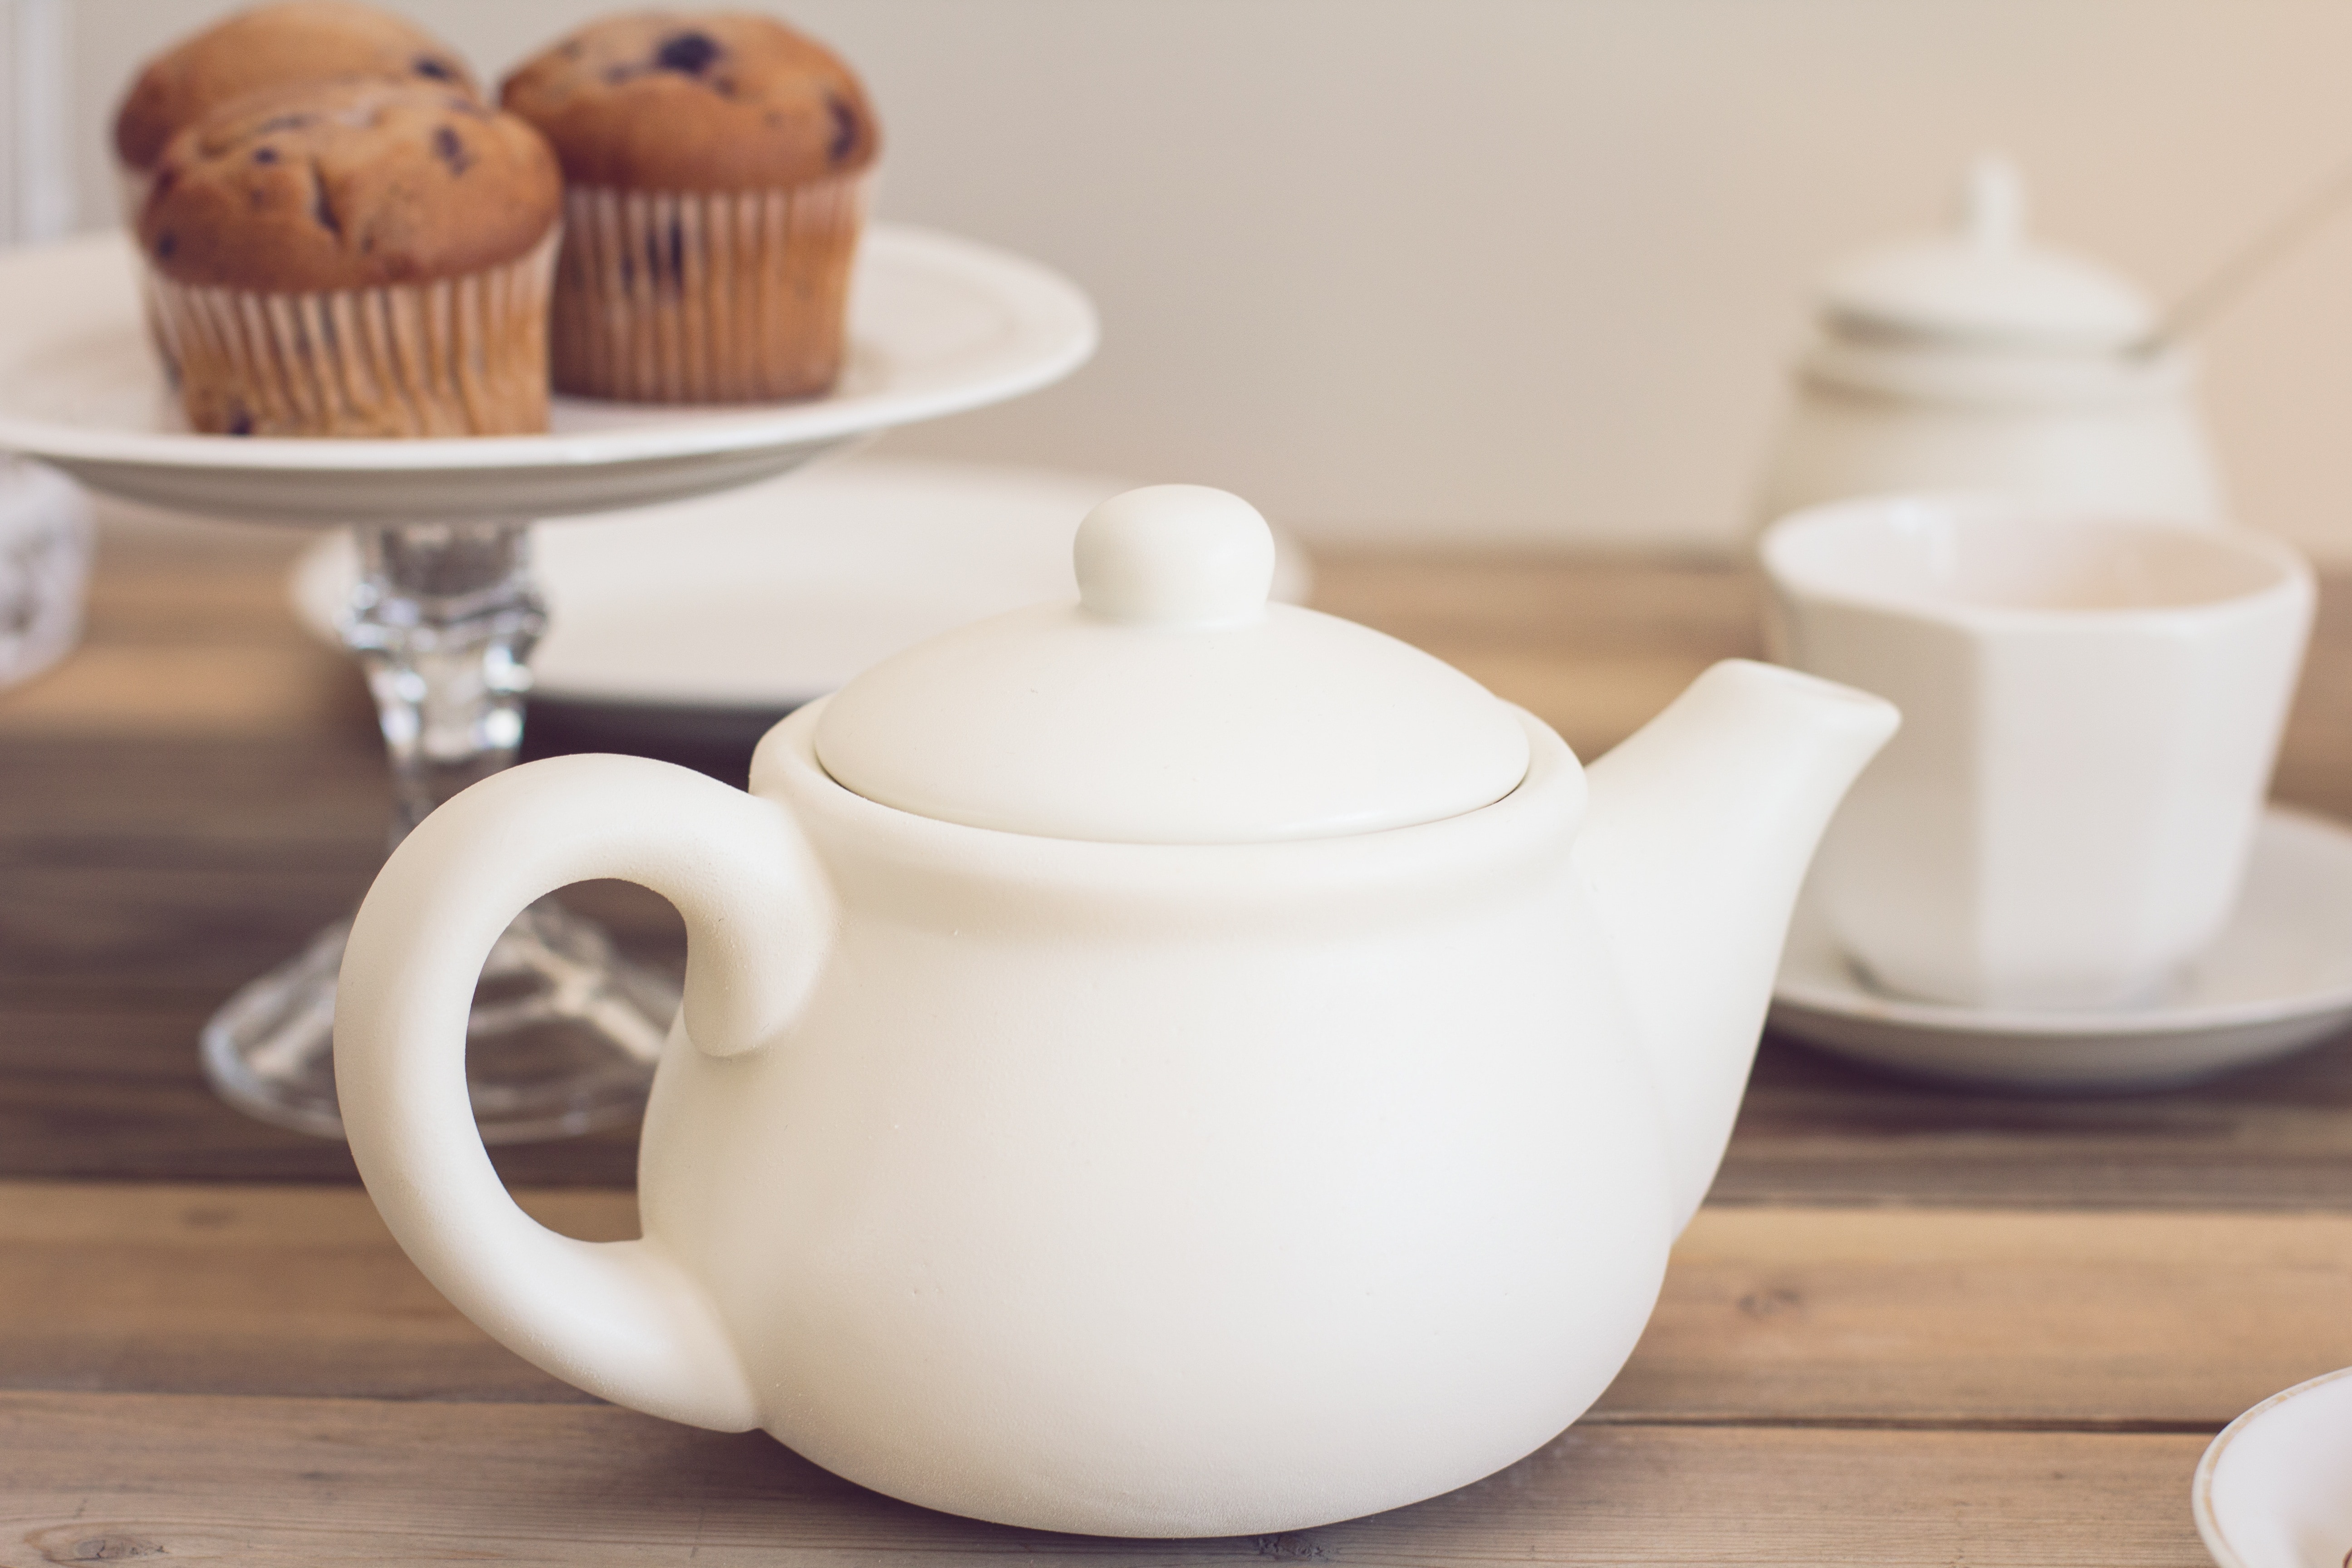 selective focus photo of white ceramic tea pot near three brown muffins on white plate